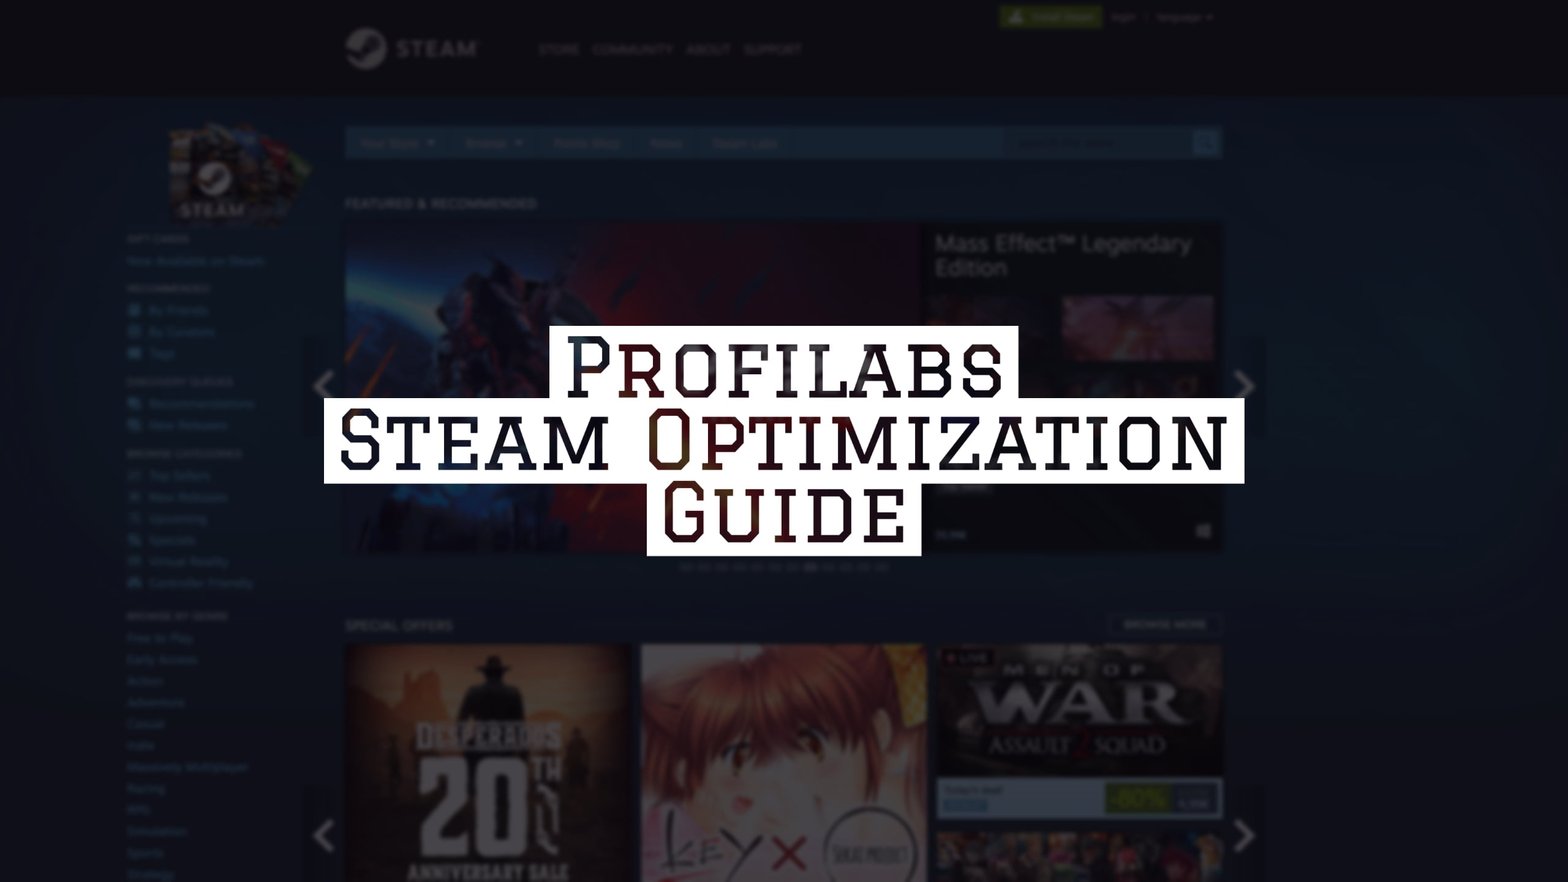 How To Optimize Steam for Competitive Gaming